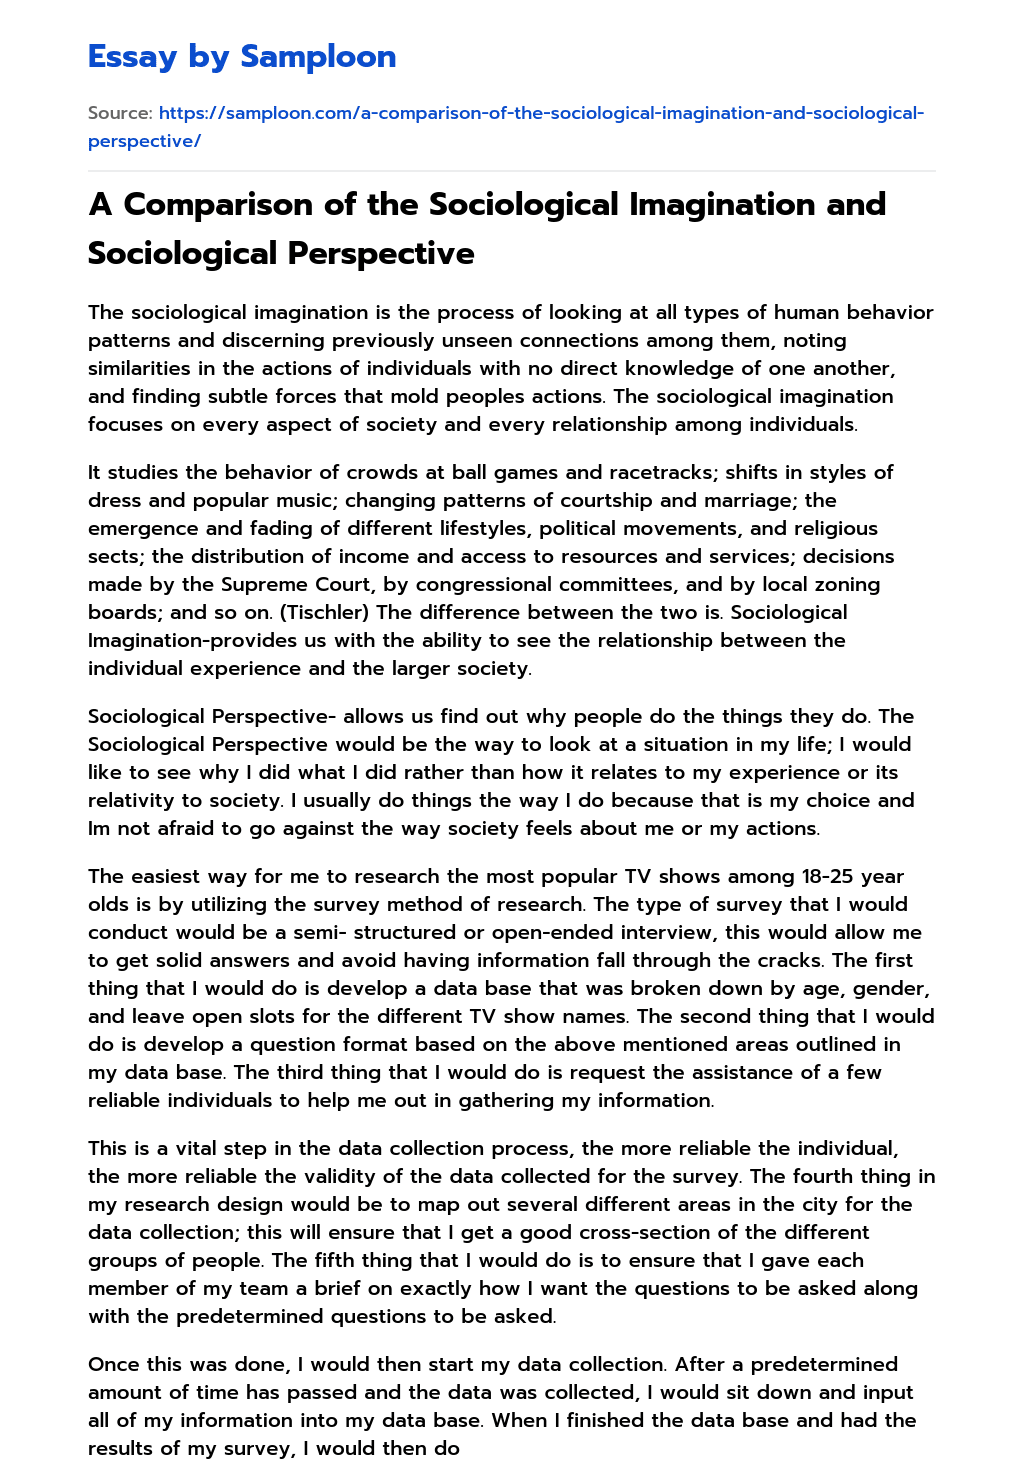 A Comparison of the Sociological Imagination and Sociological Perspective essay